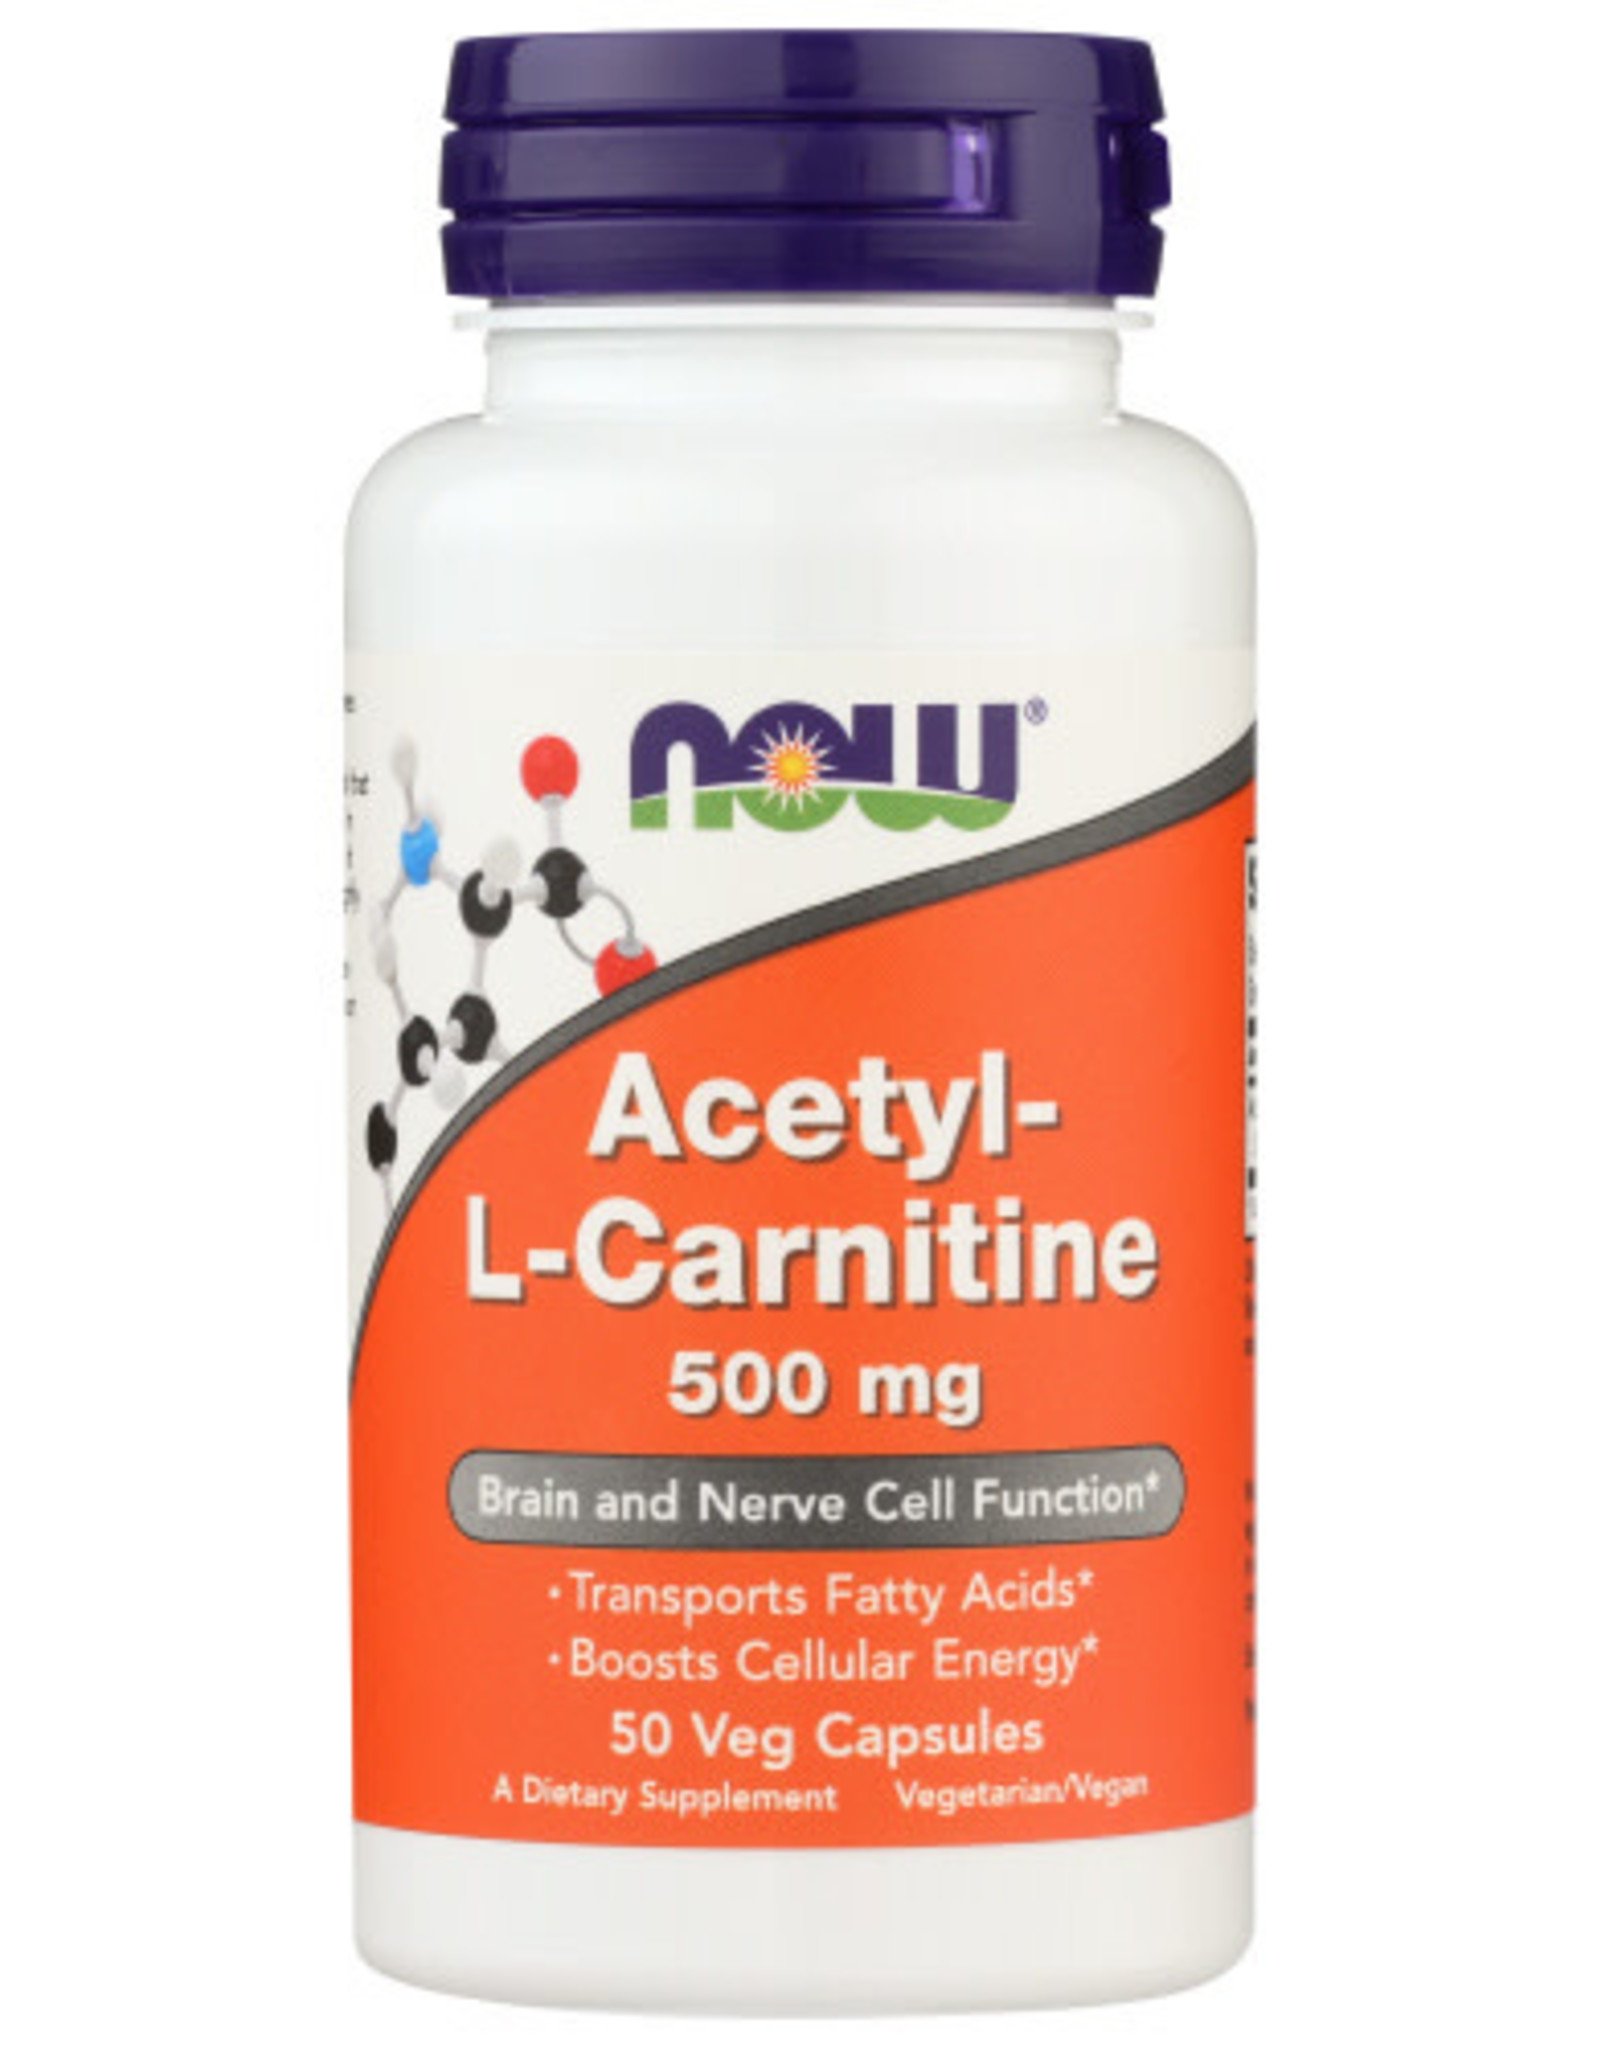 NOW FOODS NOW FOODS ACETYL L-CARN 500 MG, 50 CAPSULES